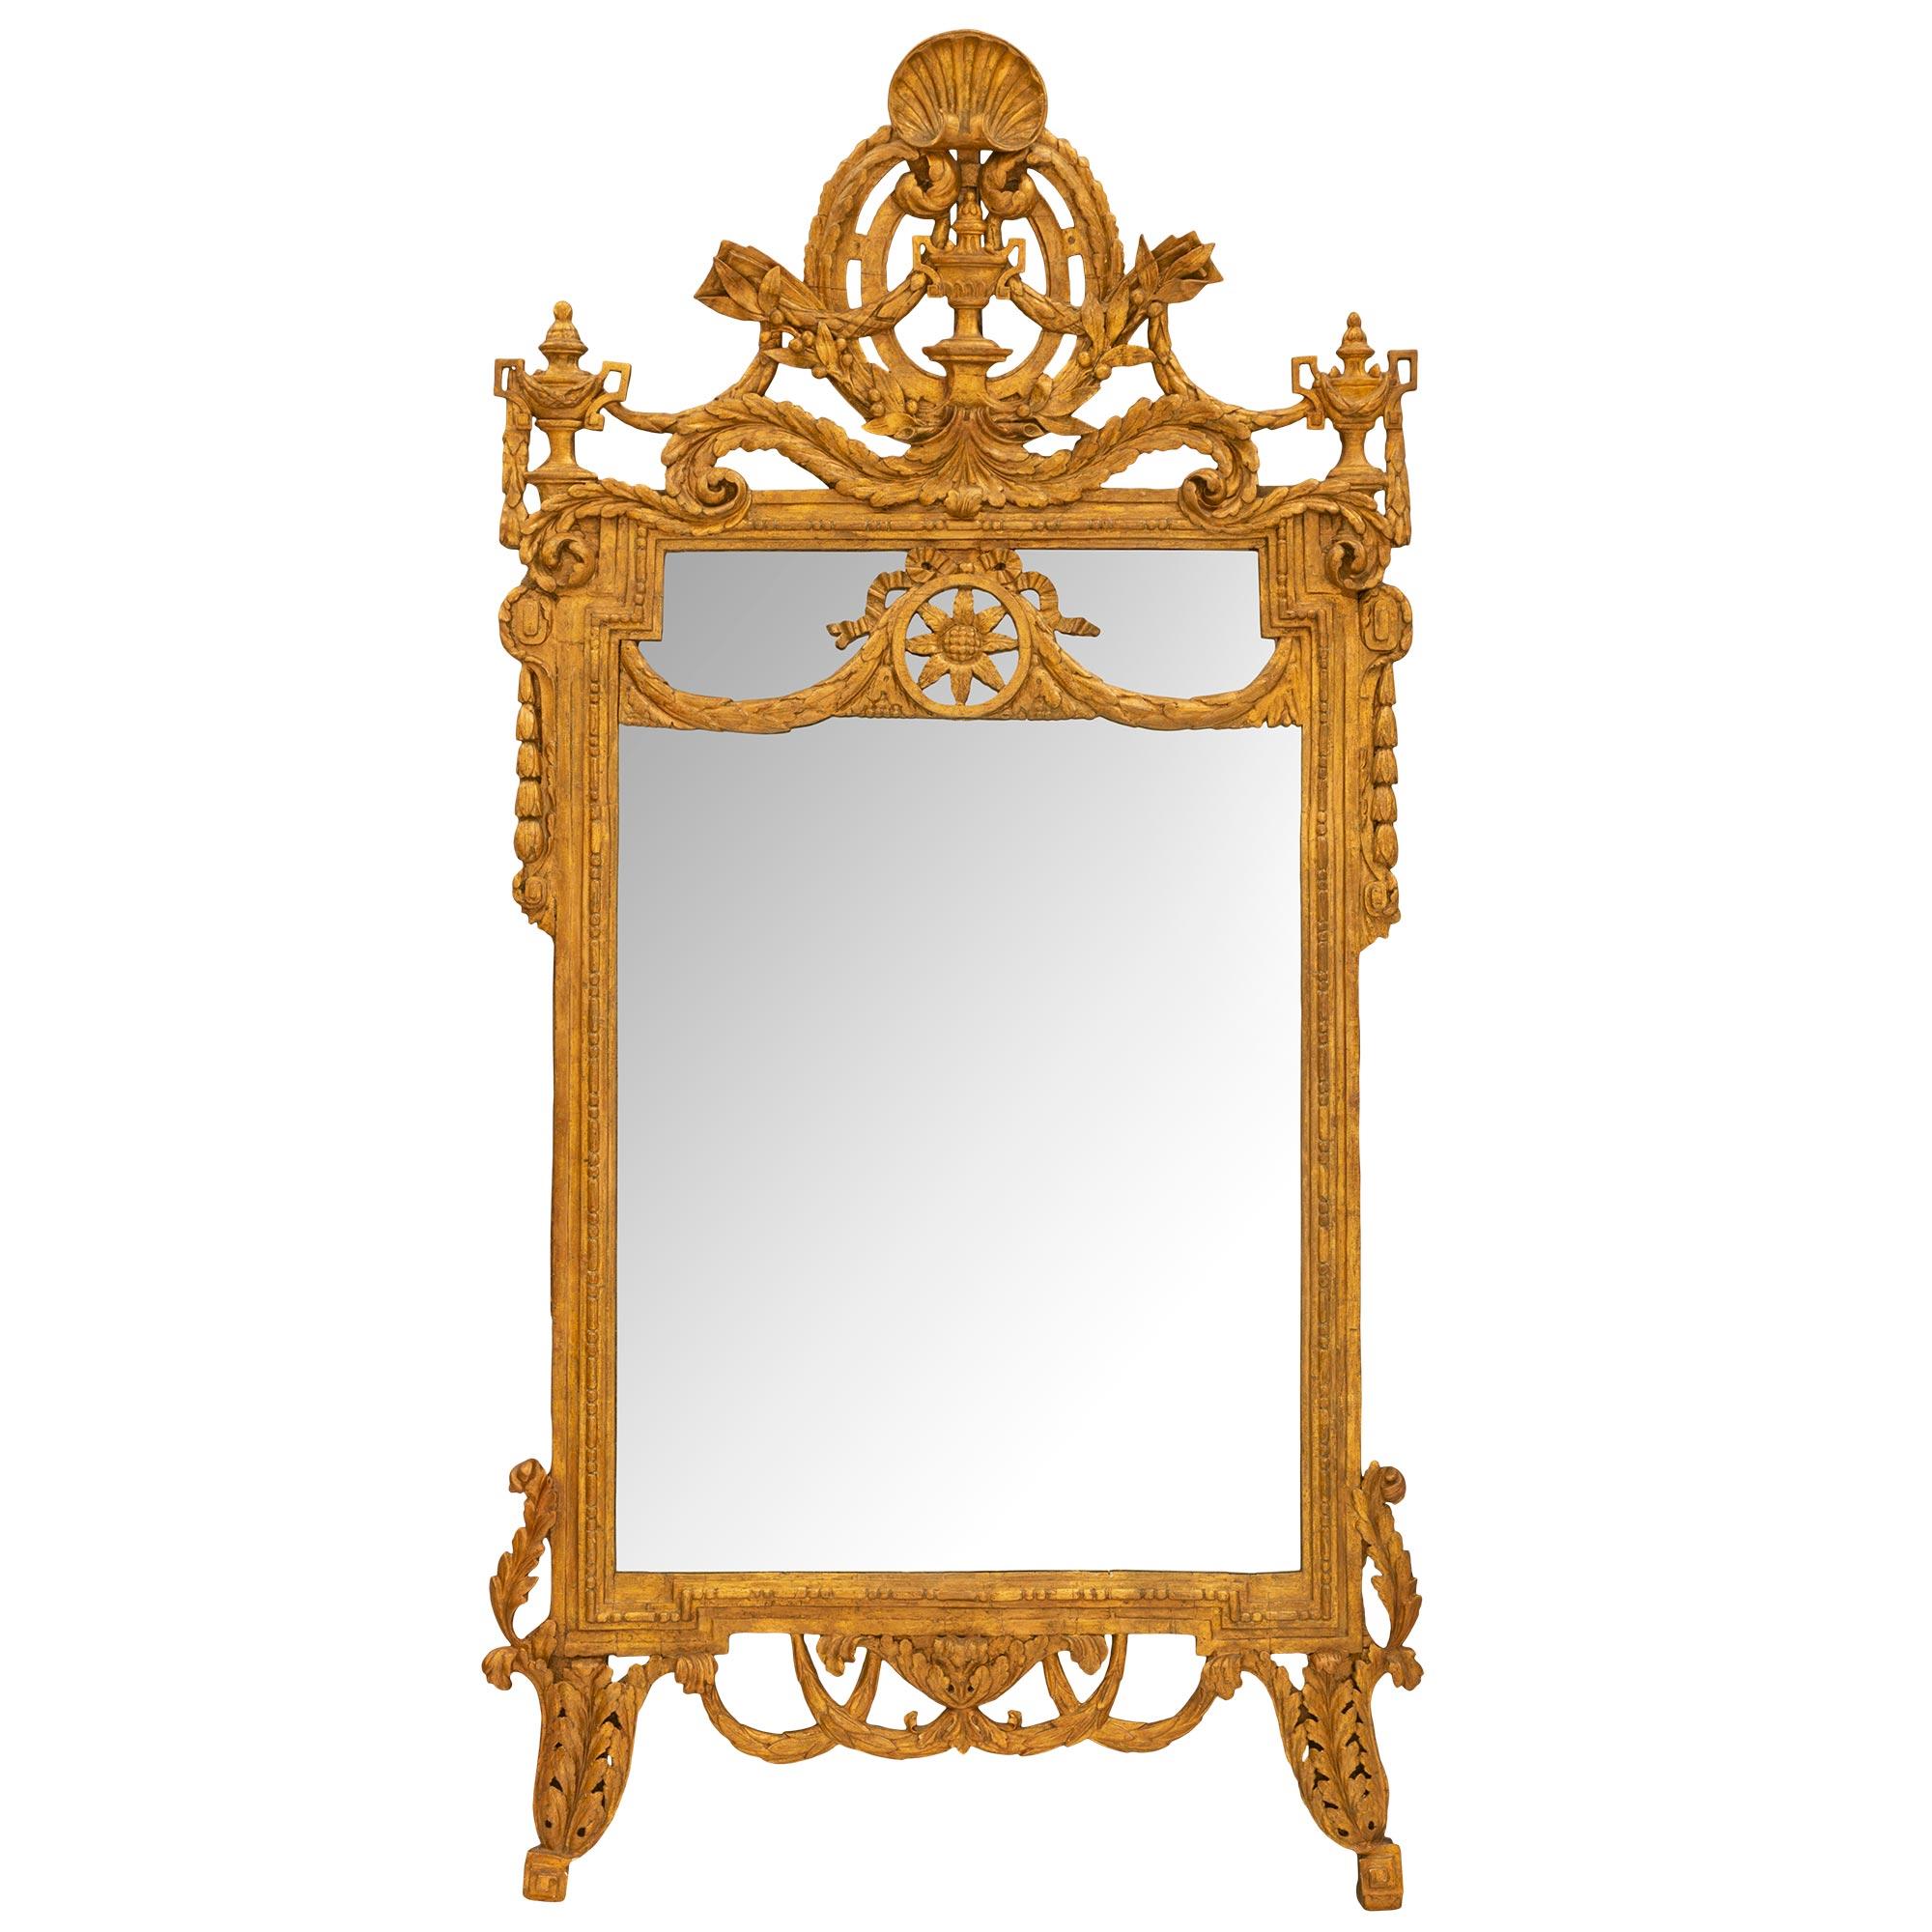 A spectacular early 18th century Italian giltwood mirror, circa 1730. The mirror is raised on richly carved acanthus leaf supports. The egg and dart border is joined at the top with a pierced central rosette medallion draping laurel garland topped